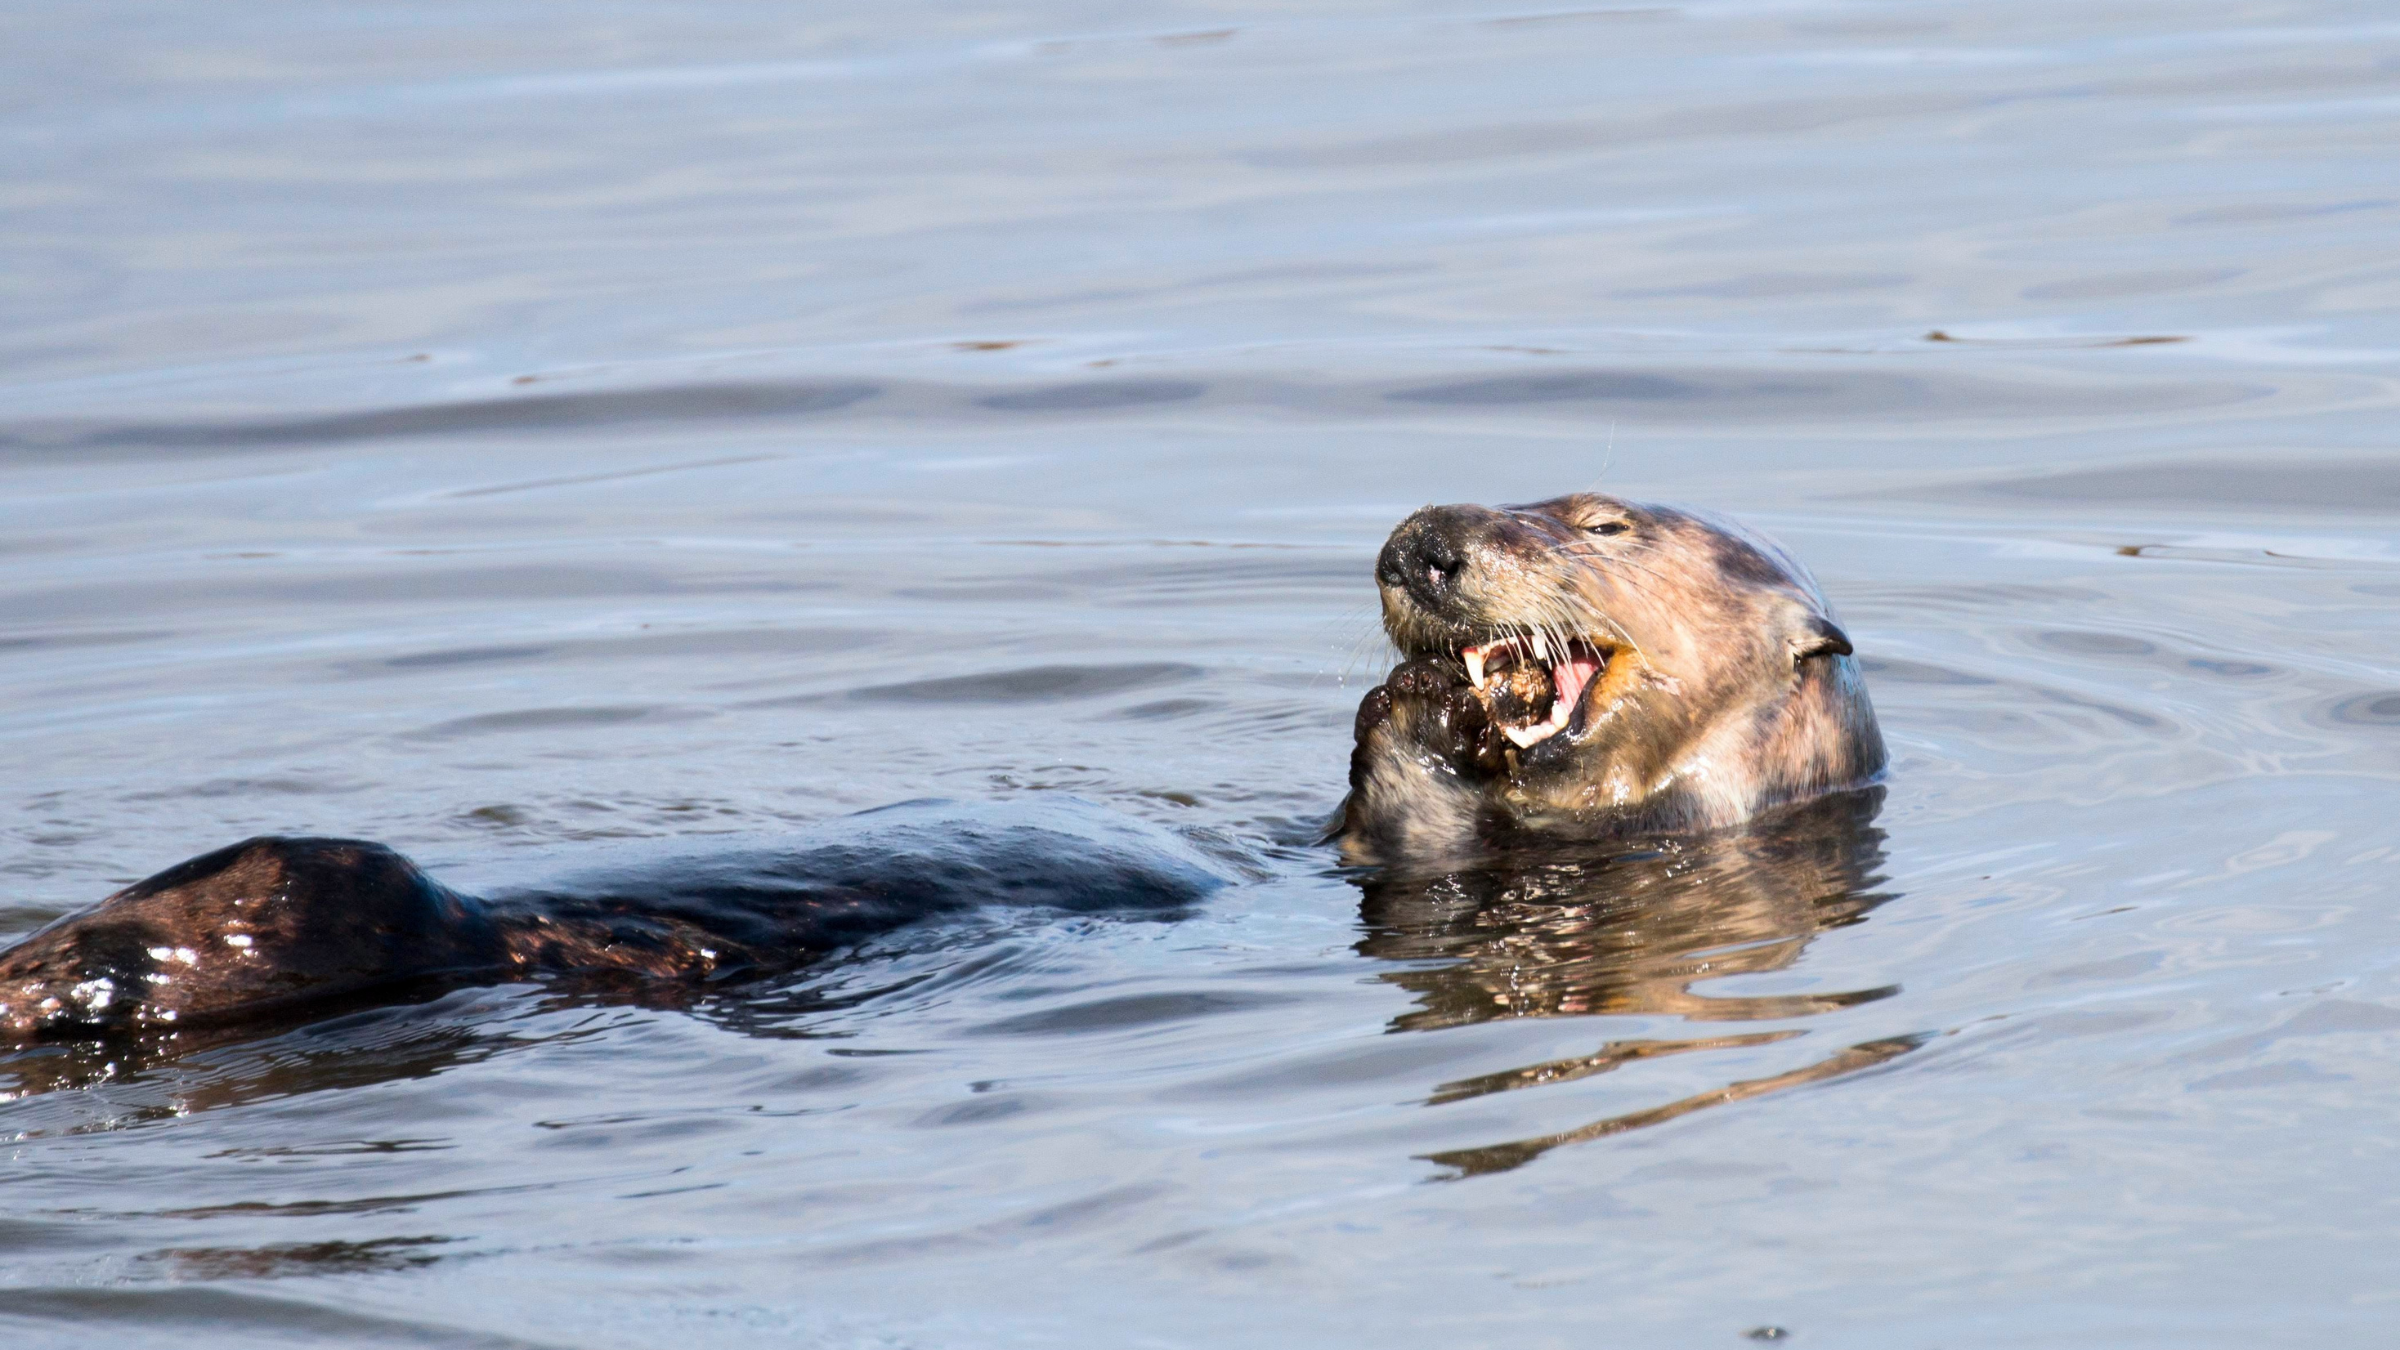 A sea otter feeds on a marine animal. Image by Chris Law.